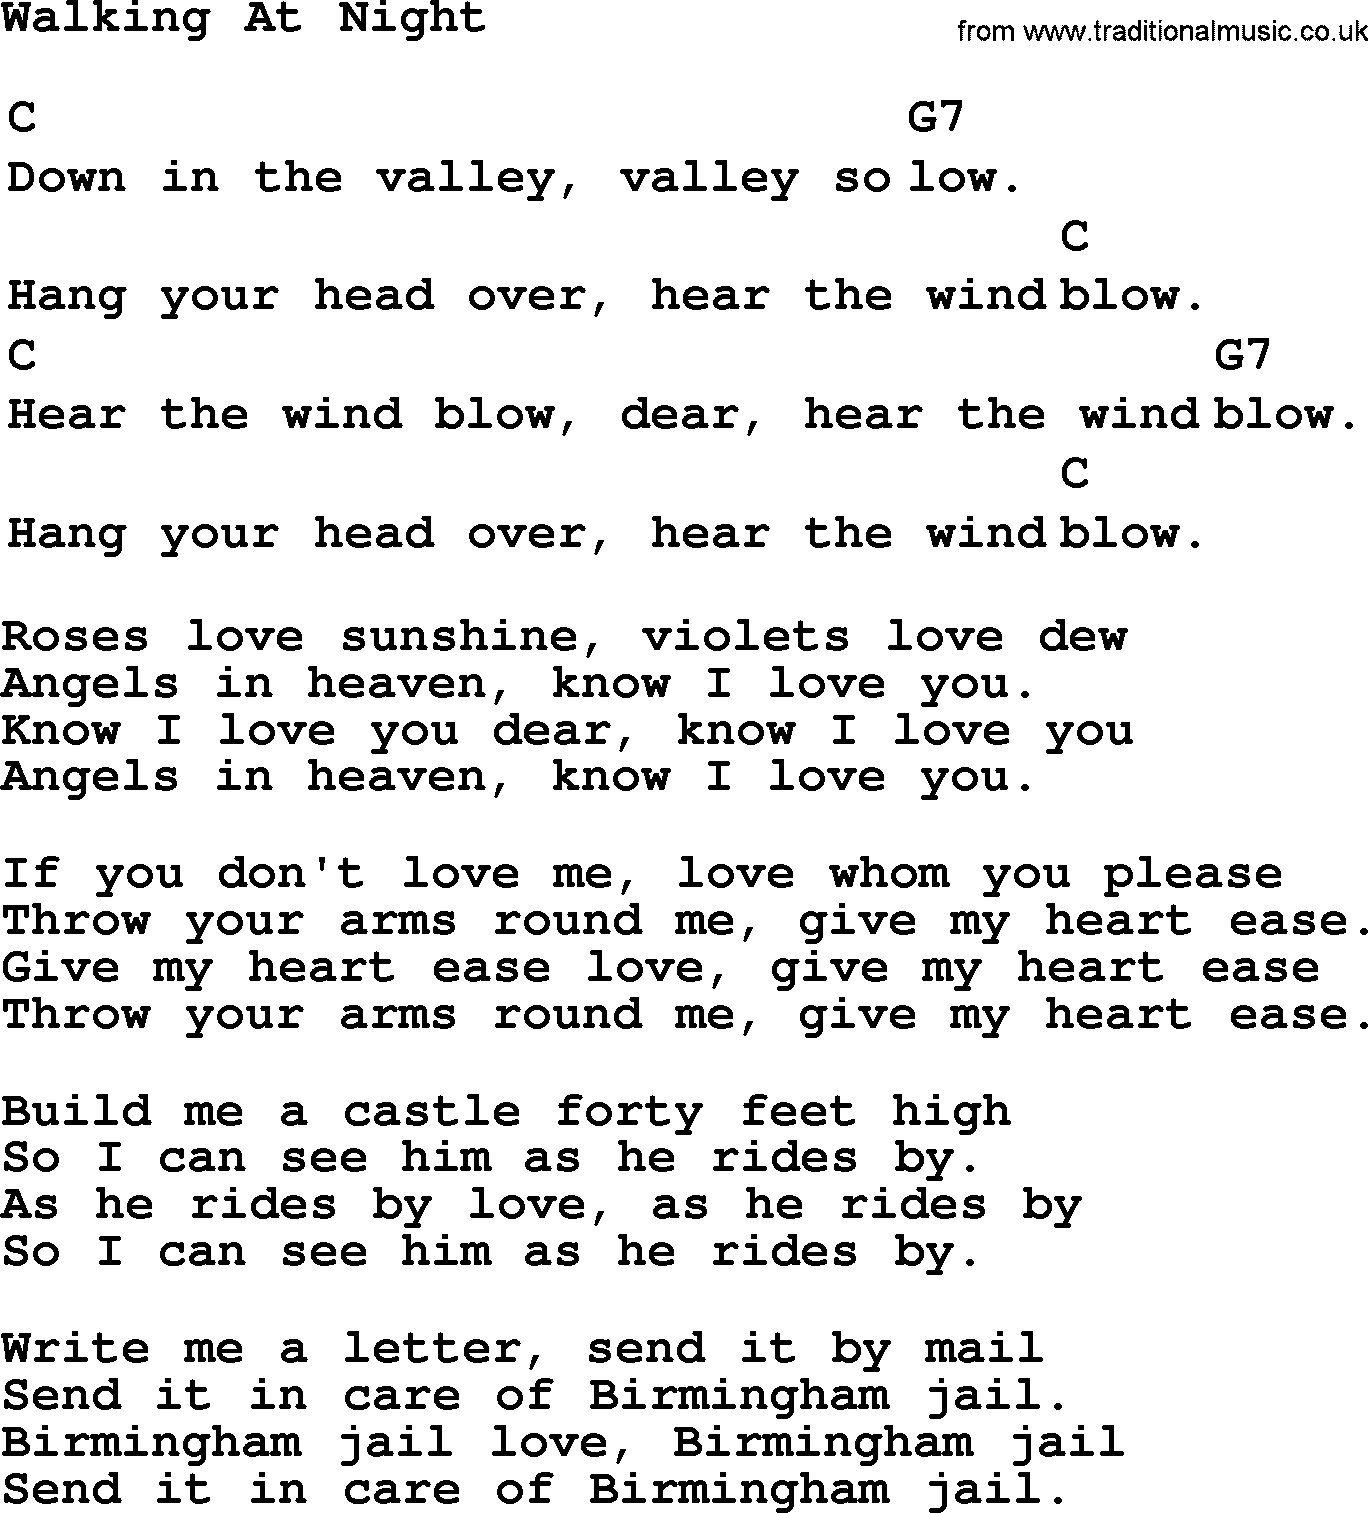 Top 1000 Most Popular Folk and Old-time Songs: Down In The Valley, lyrics and chords